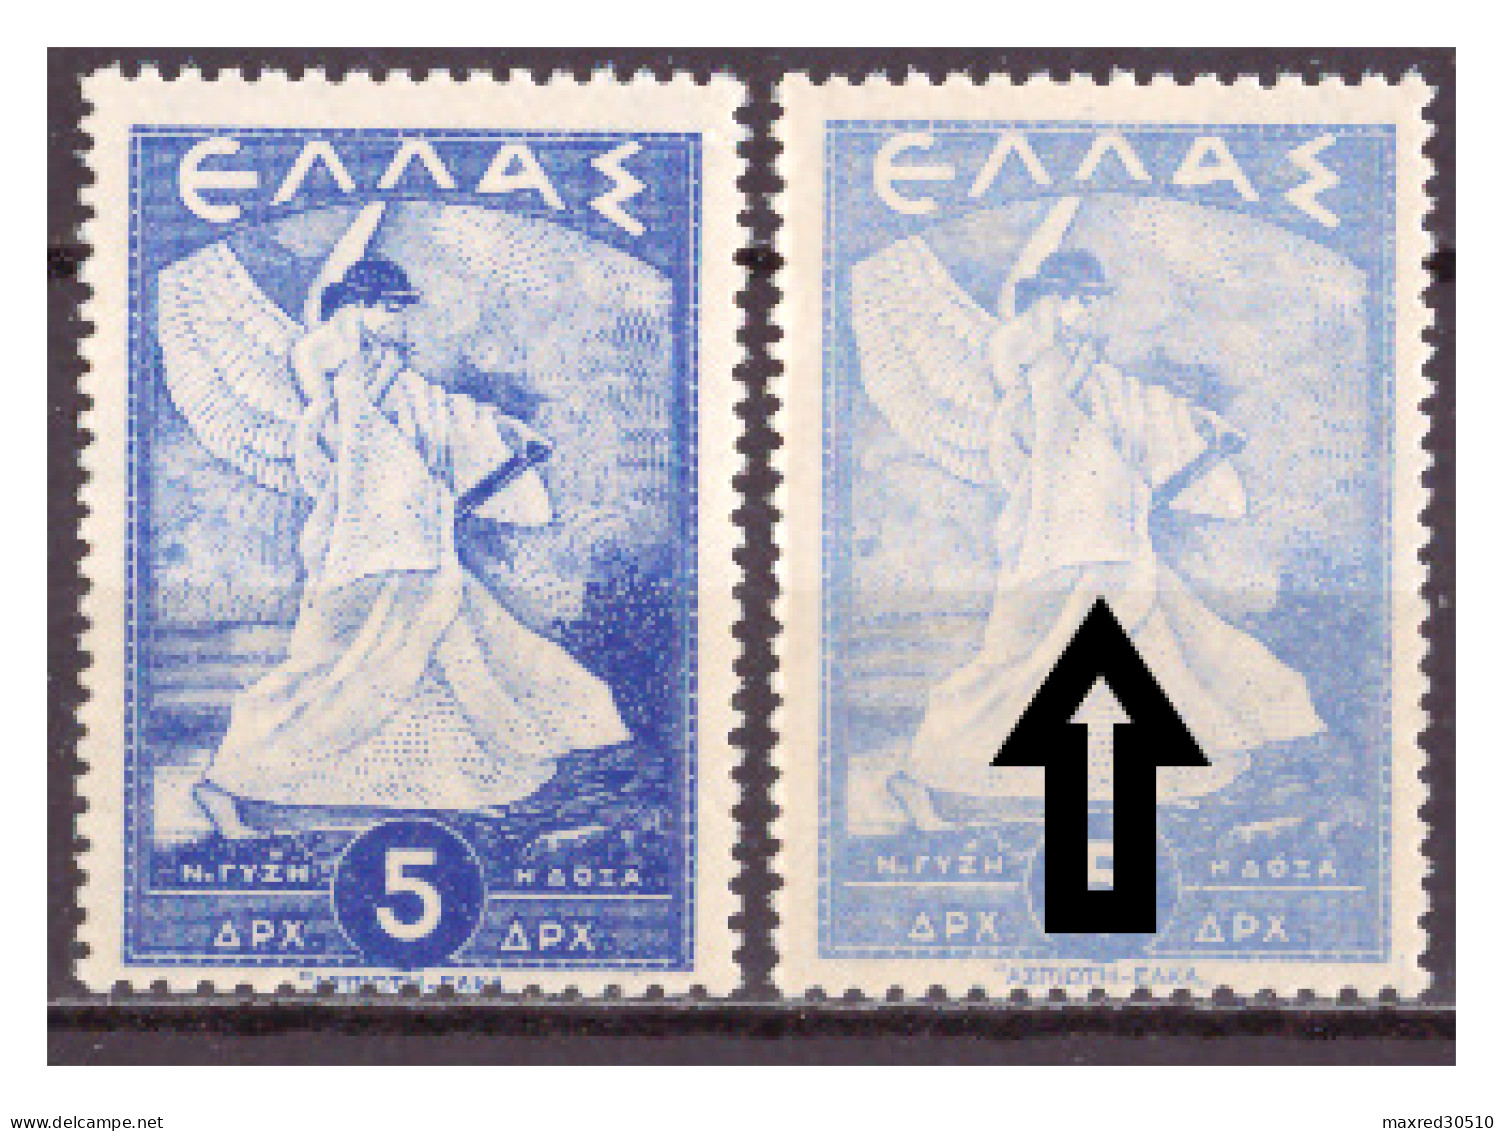 GREECE 1945 2X5L. OF THE "GLORY ISSUE" THE 2ND ONE (SEE ARROW) WITH CLEAR COLOR DIFFERENCE ERROR MNH - Plaatfouten En Curiosa